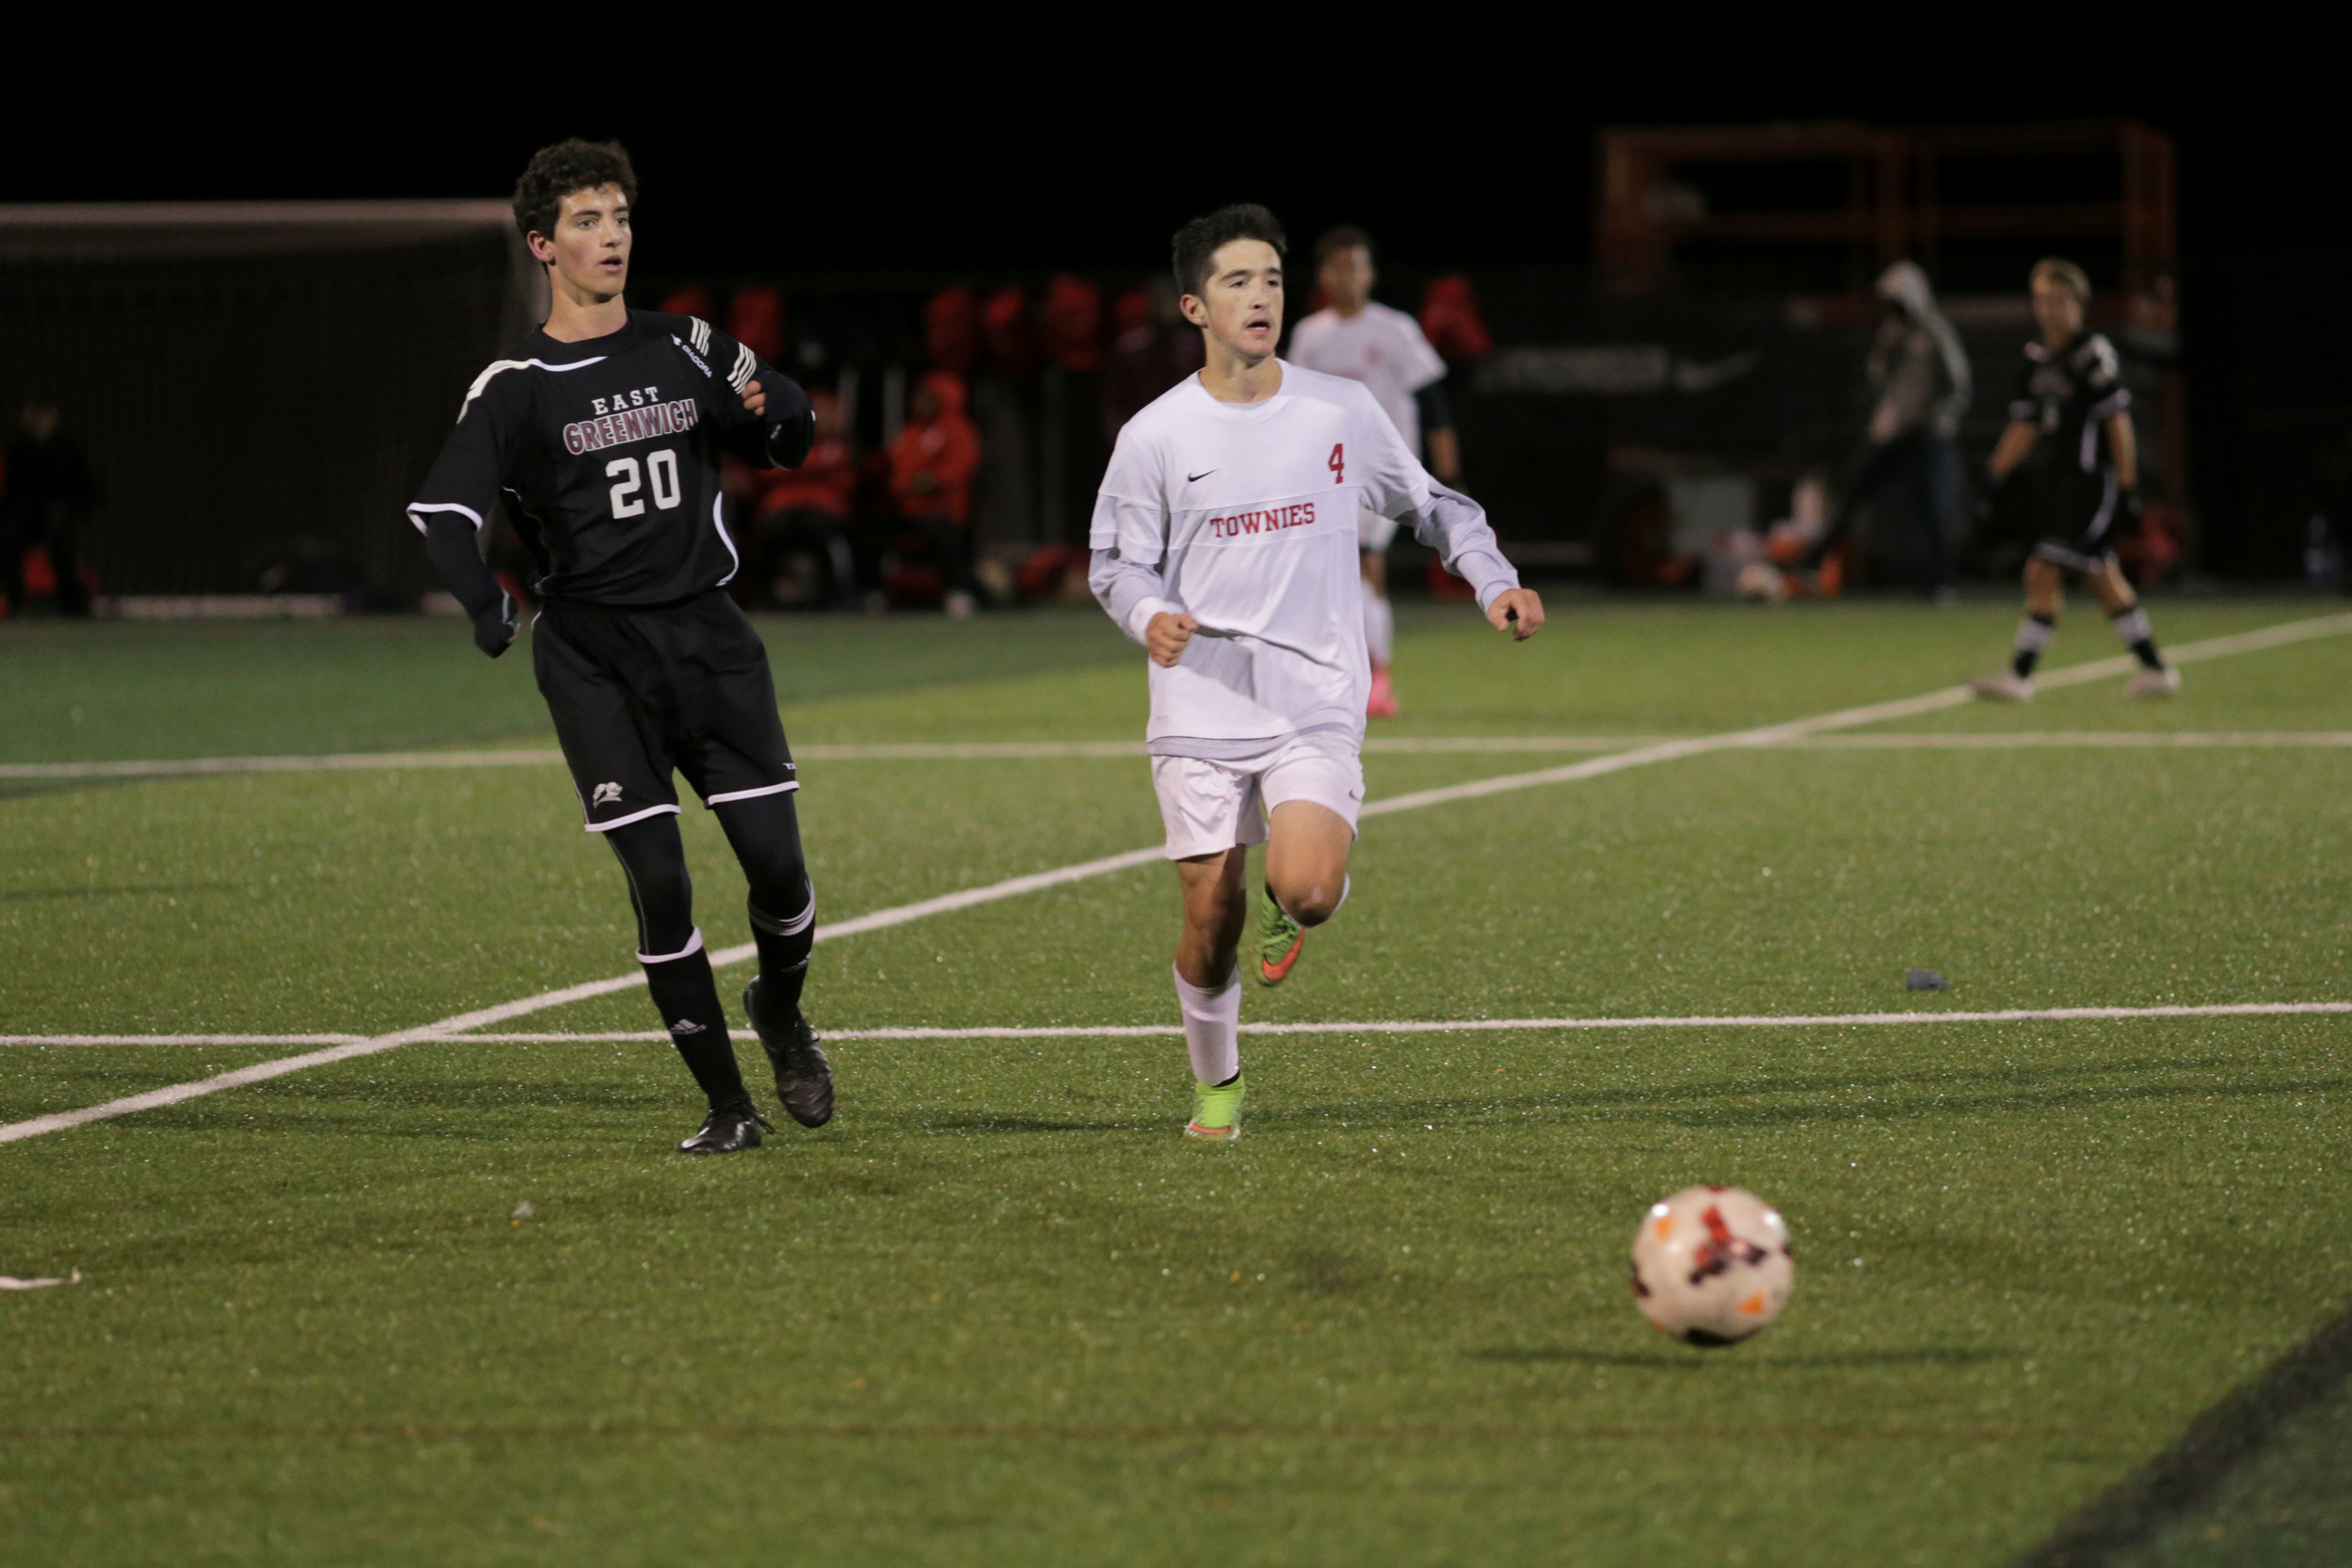 East Providence's Nathan Bento races the keep the ball in bounds at midfield.